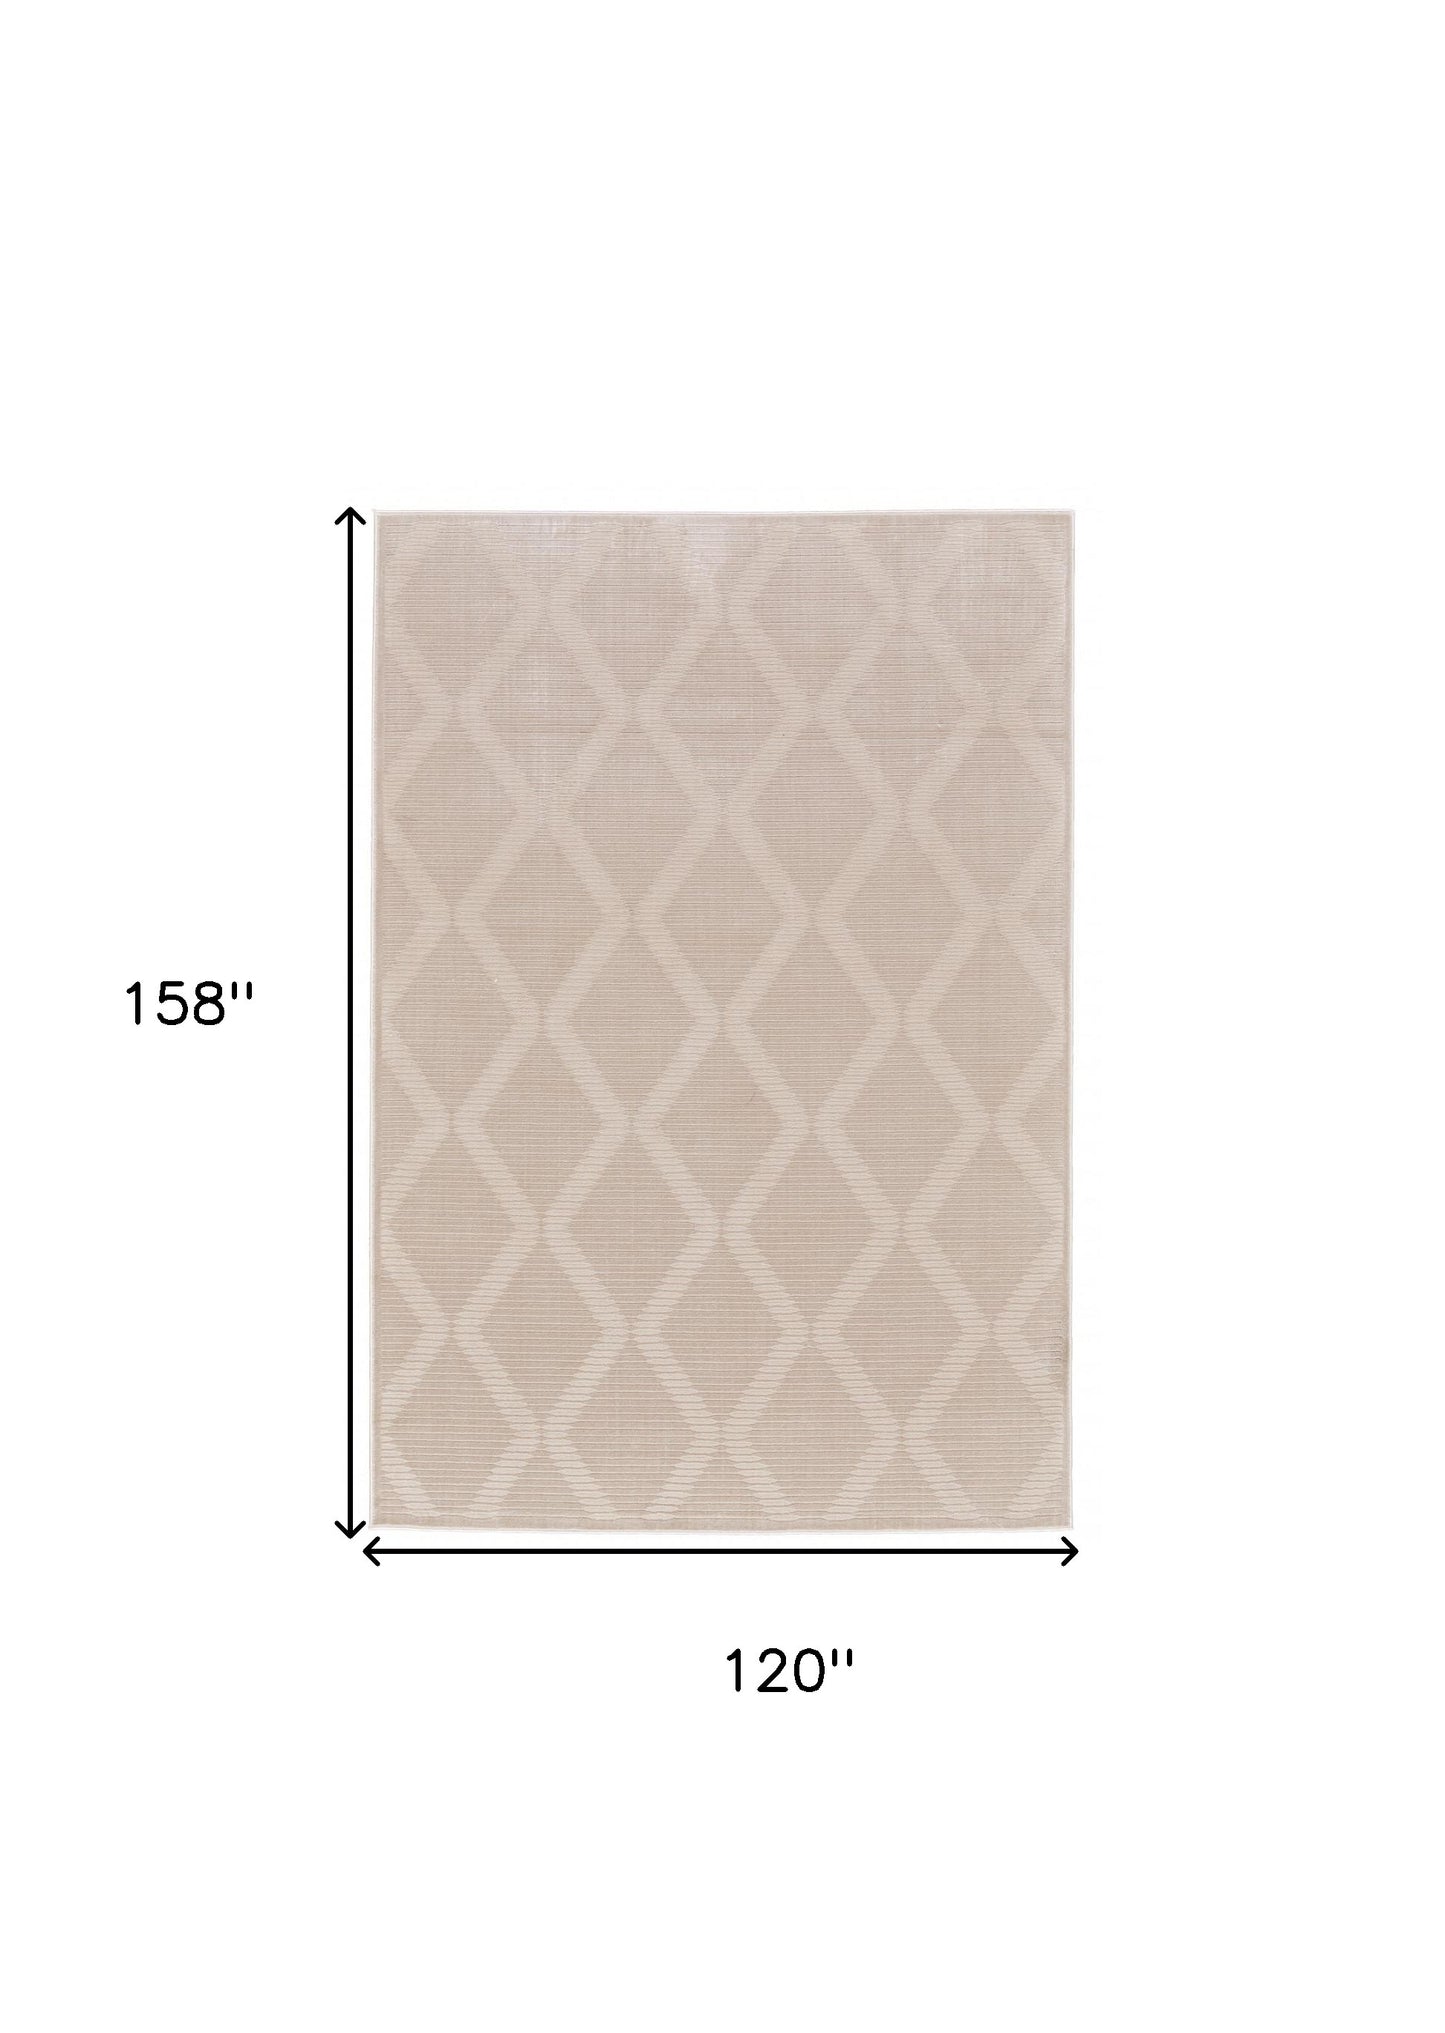 5' X 8' Ivory And Tan Geometric Stain Resistant Area Rug